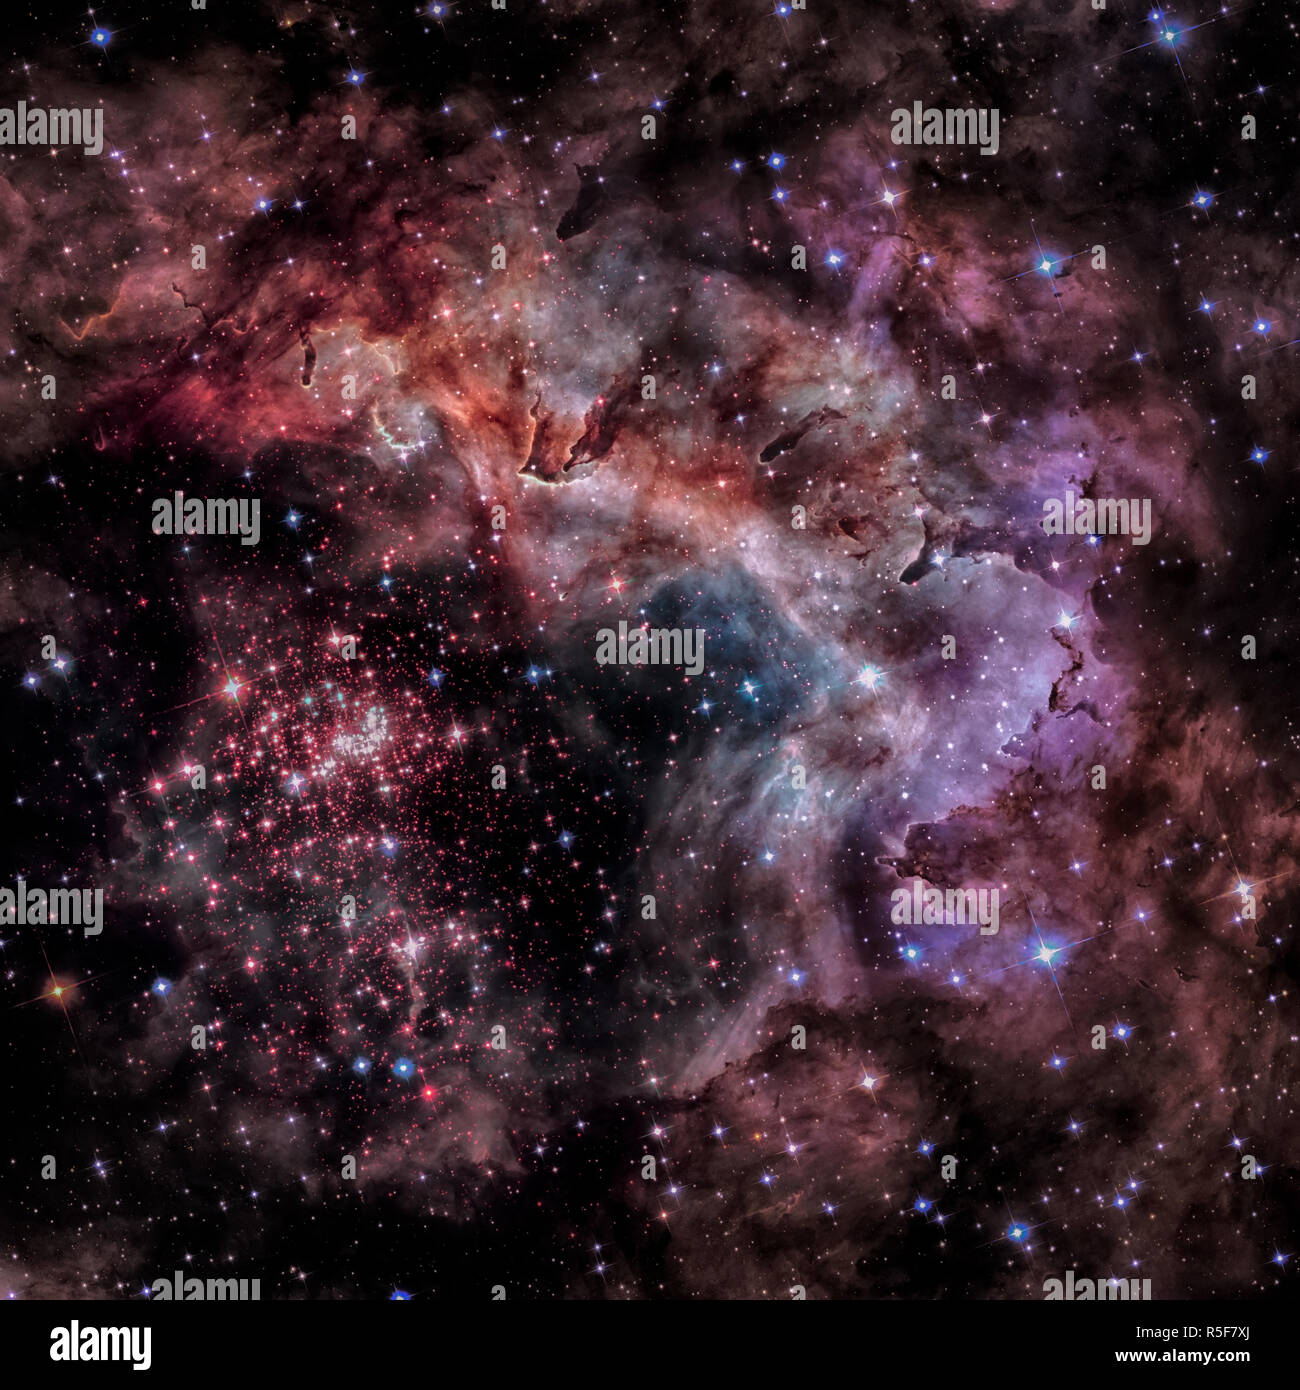 Super star cluster Westerlund 2 in the constellation Carina. Stock Photo